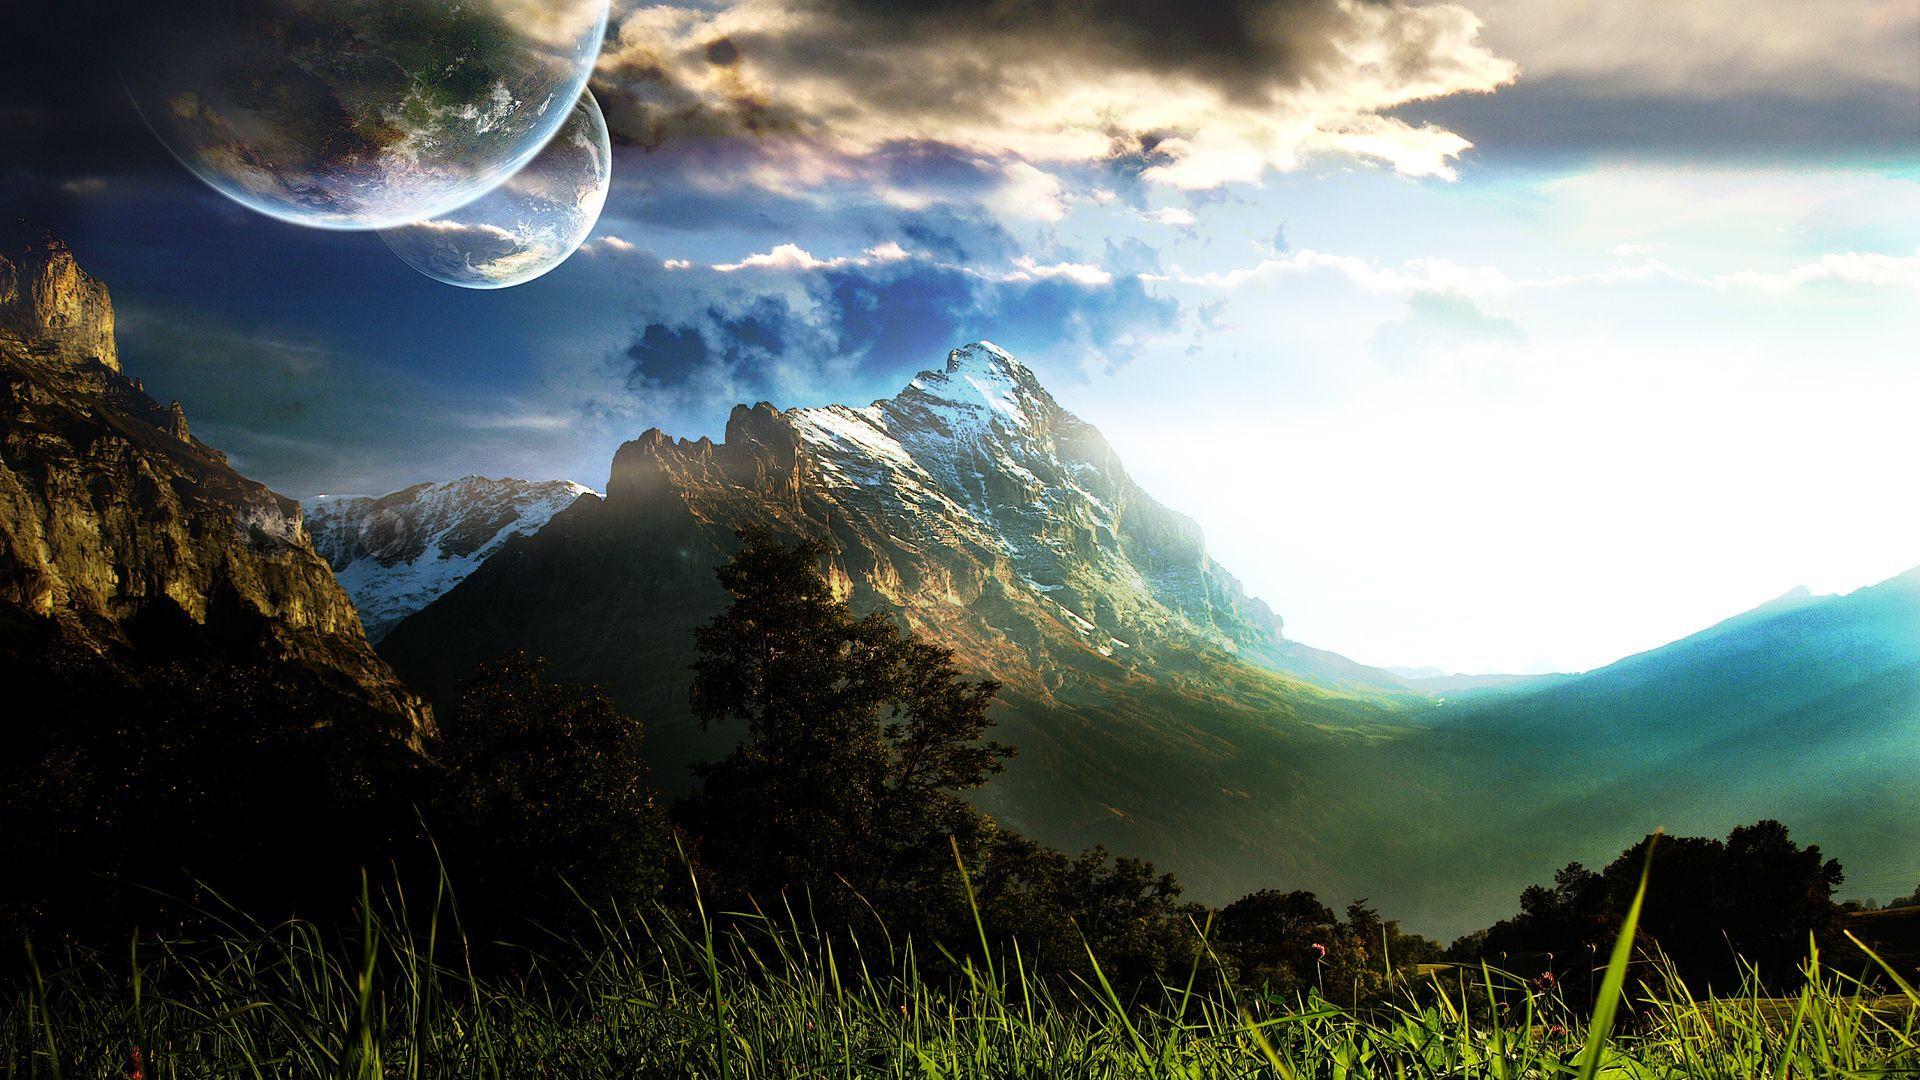 3D Landscape: Earth and Space, picture nr. 33829